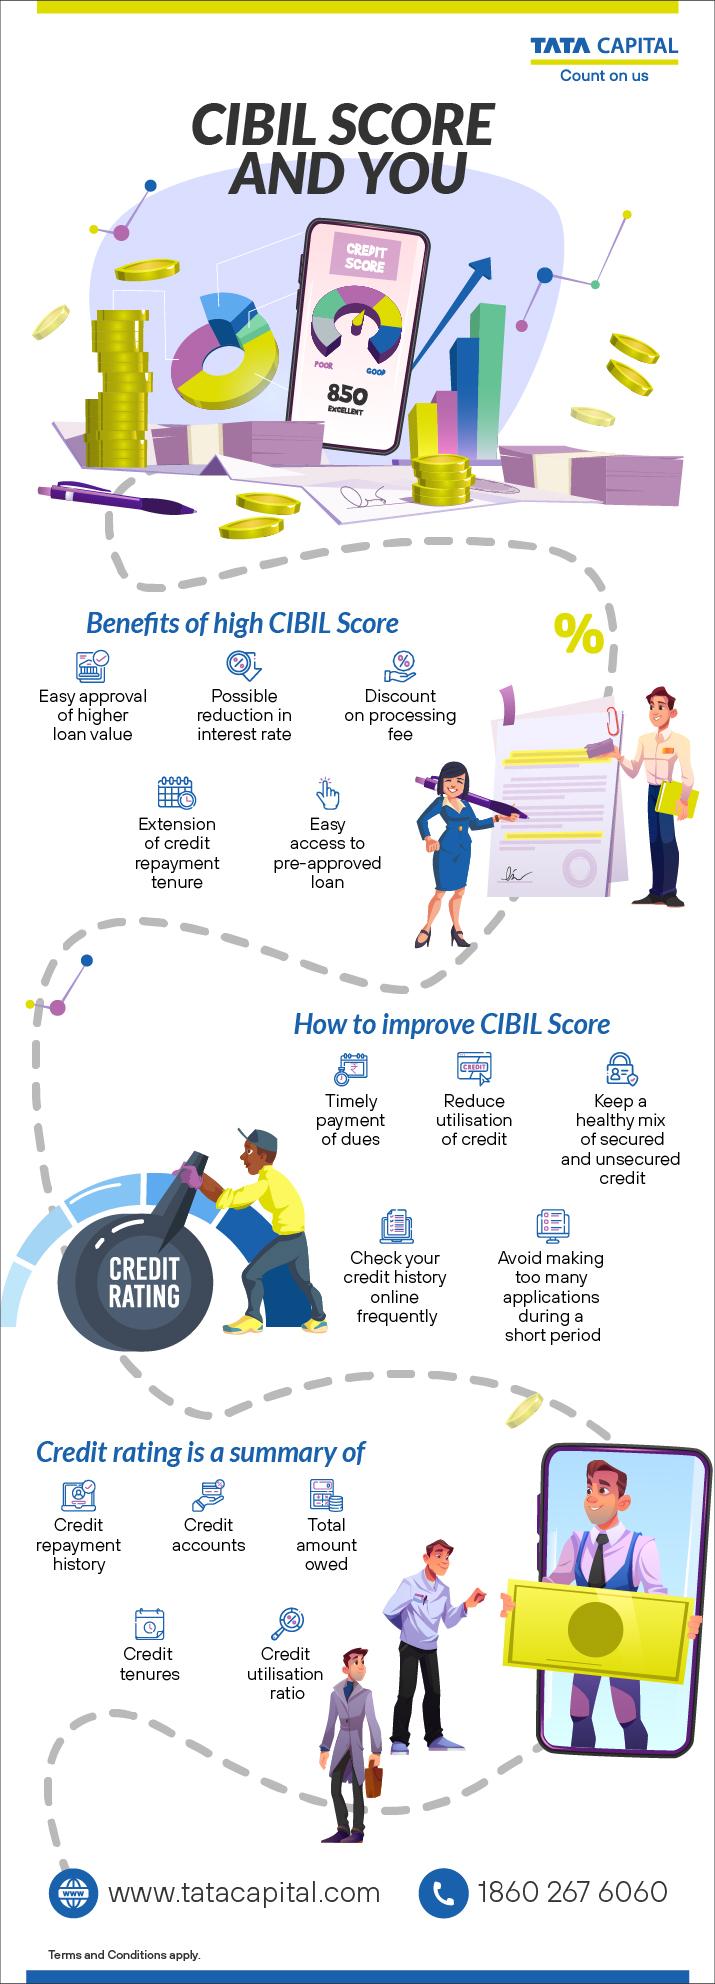 Tips on How to Improve CIBIL Score Immediately